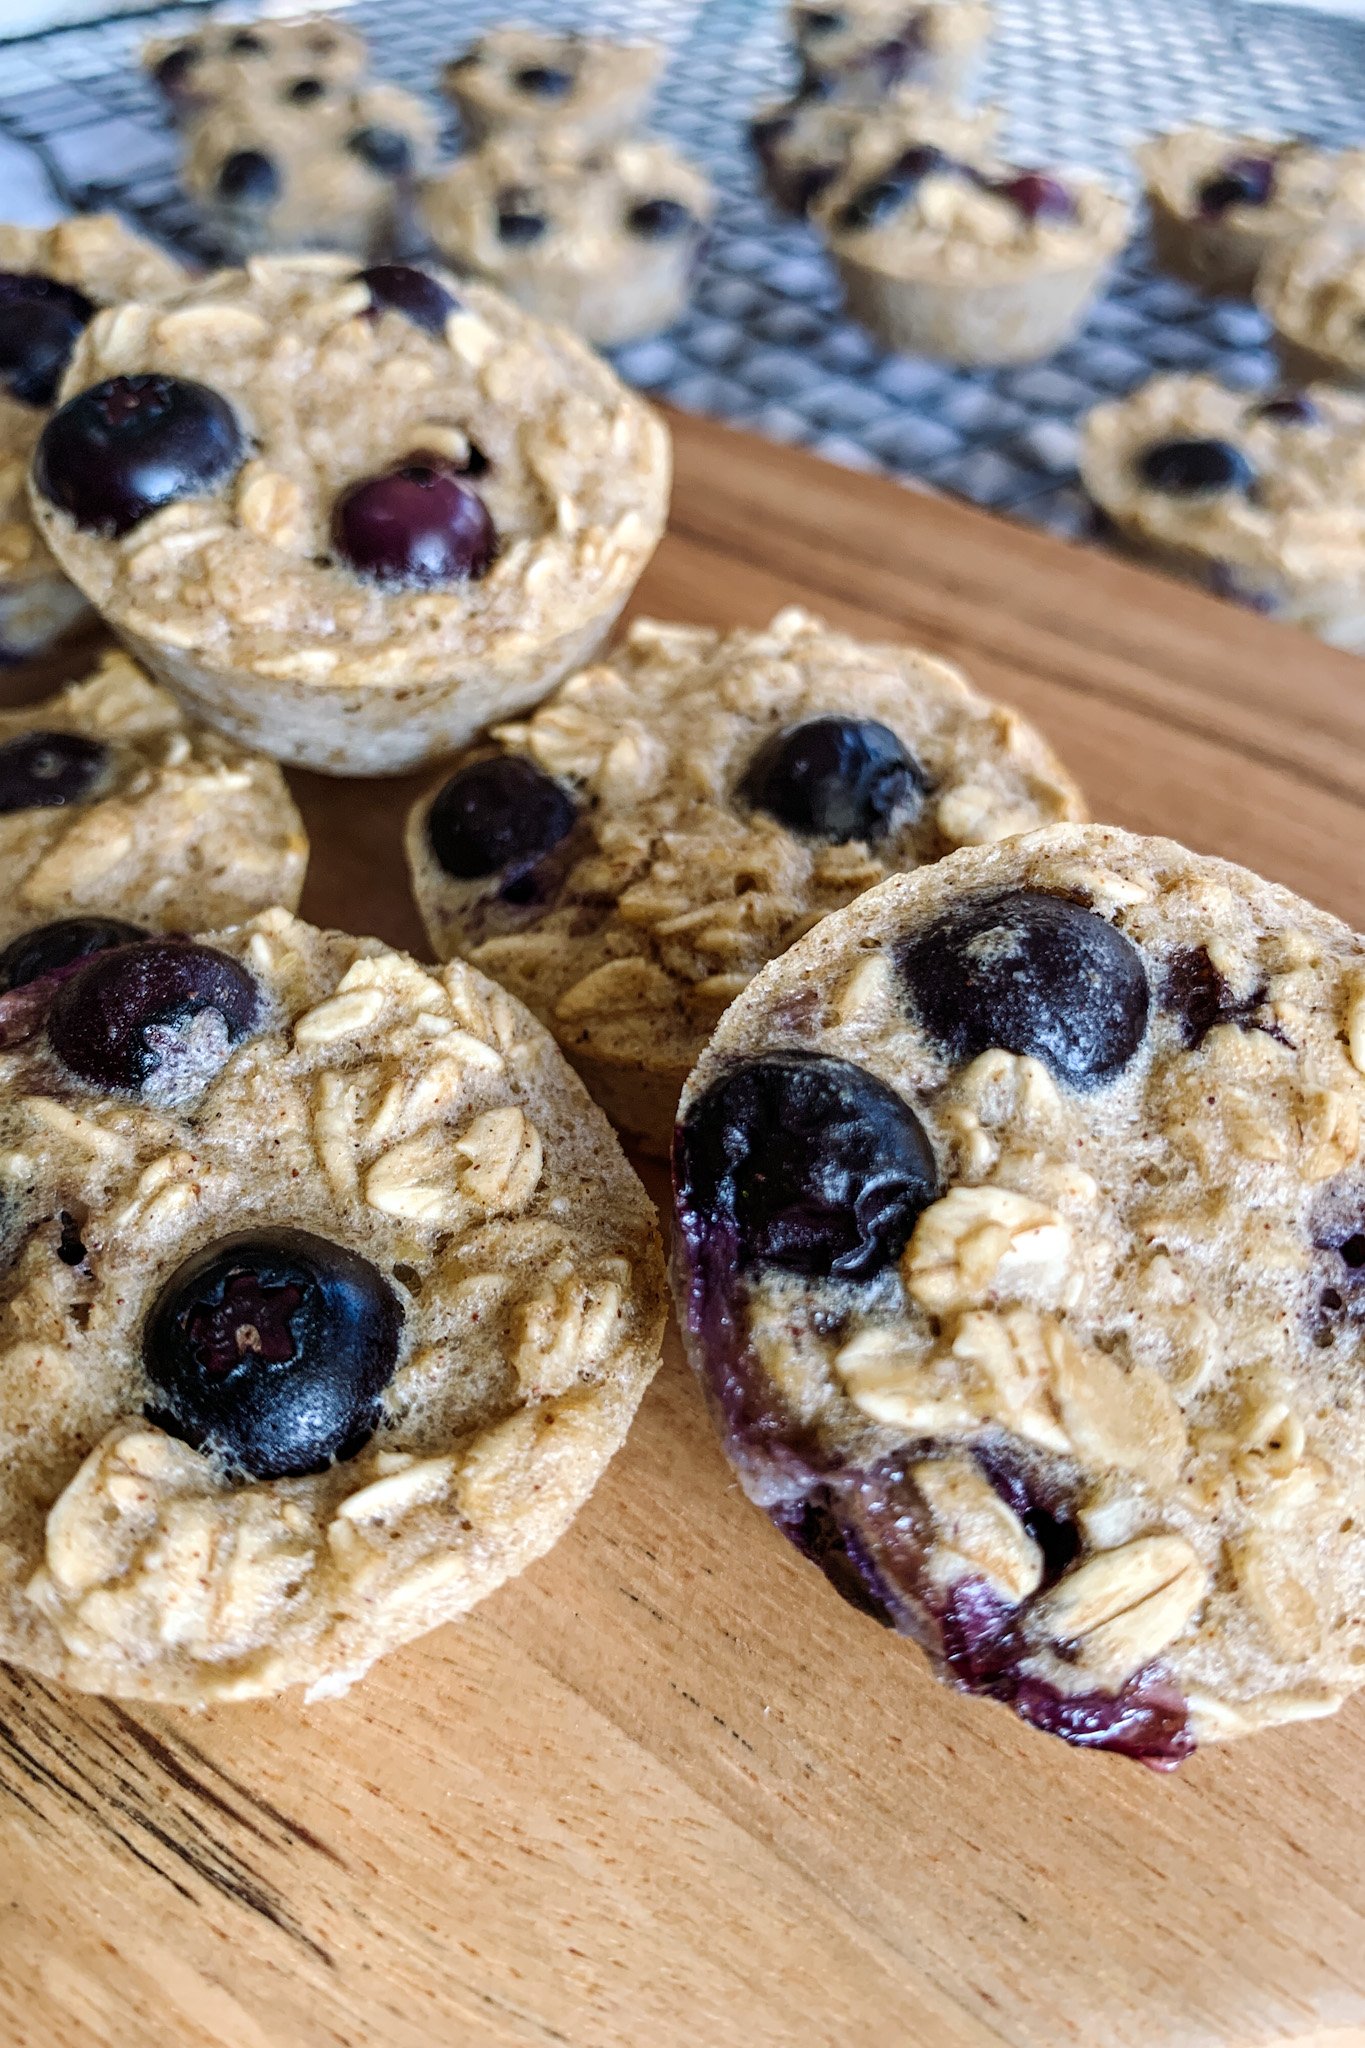 Blueberry banana oatmeal bites served on a wooden cutting board